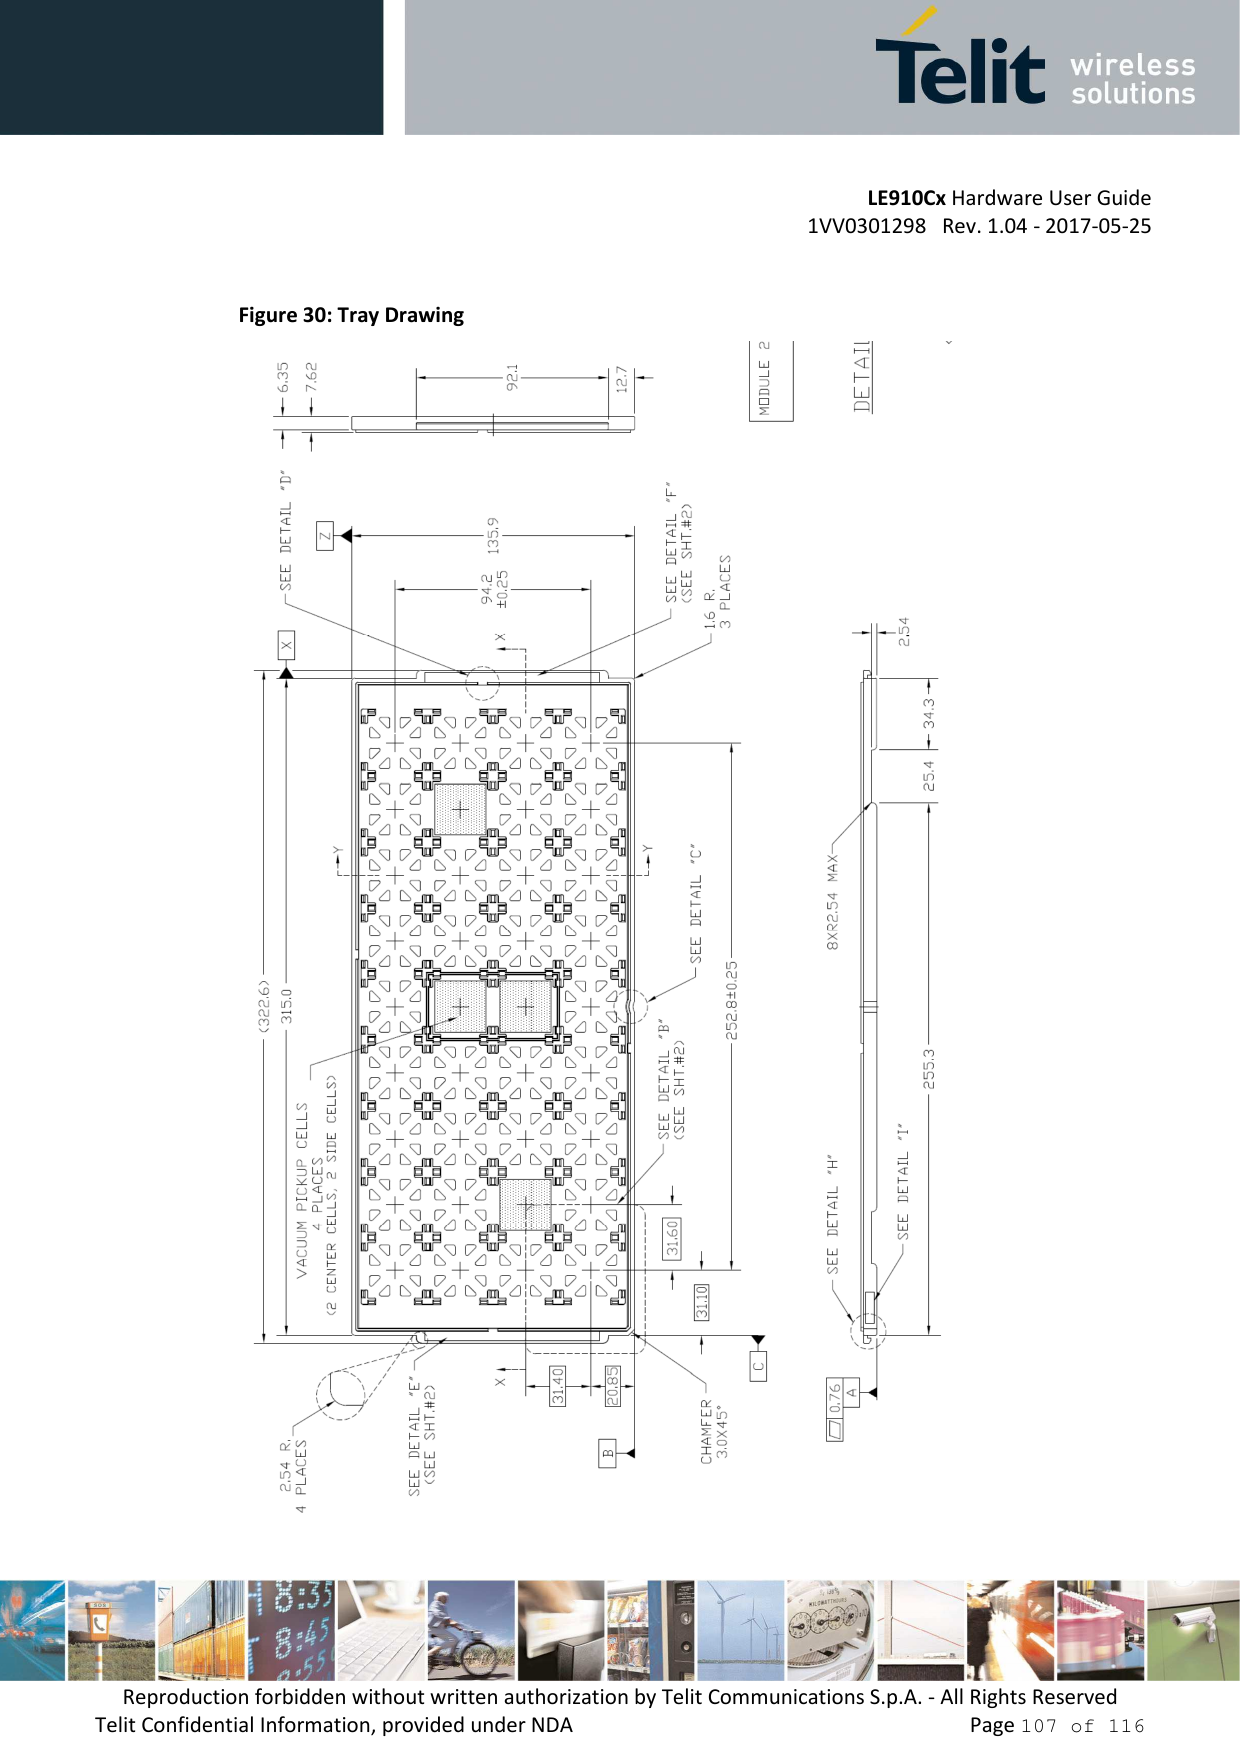         LE910Cx Hardware User Guide 1VV0301298   Rev. 1.04 - 2017-05-25 Reproduction forbidden without written authorization by Telit Communications S.p.A. - All Rights Reserved Telit Confidential Information, provided under NDA                 Page 107 of 116  Figure 30: Tray Drawing  